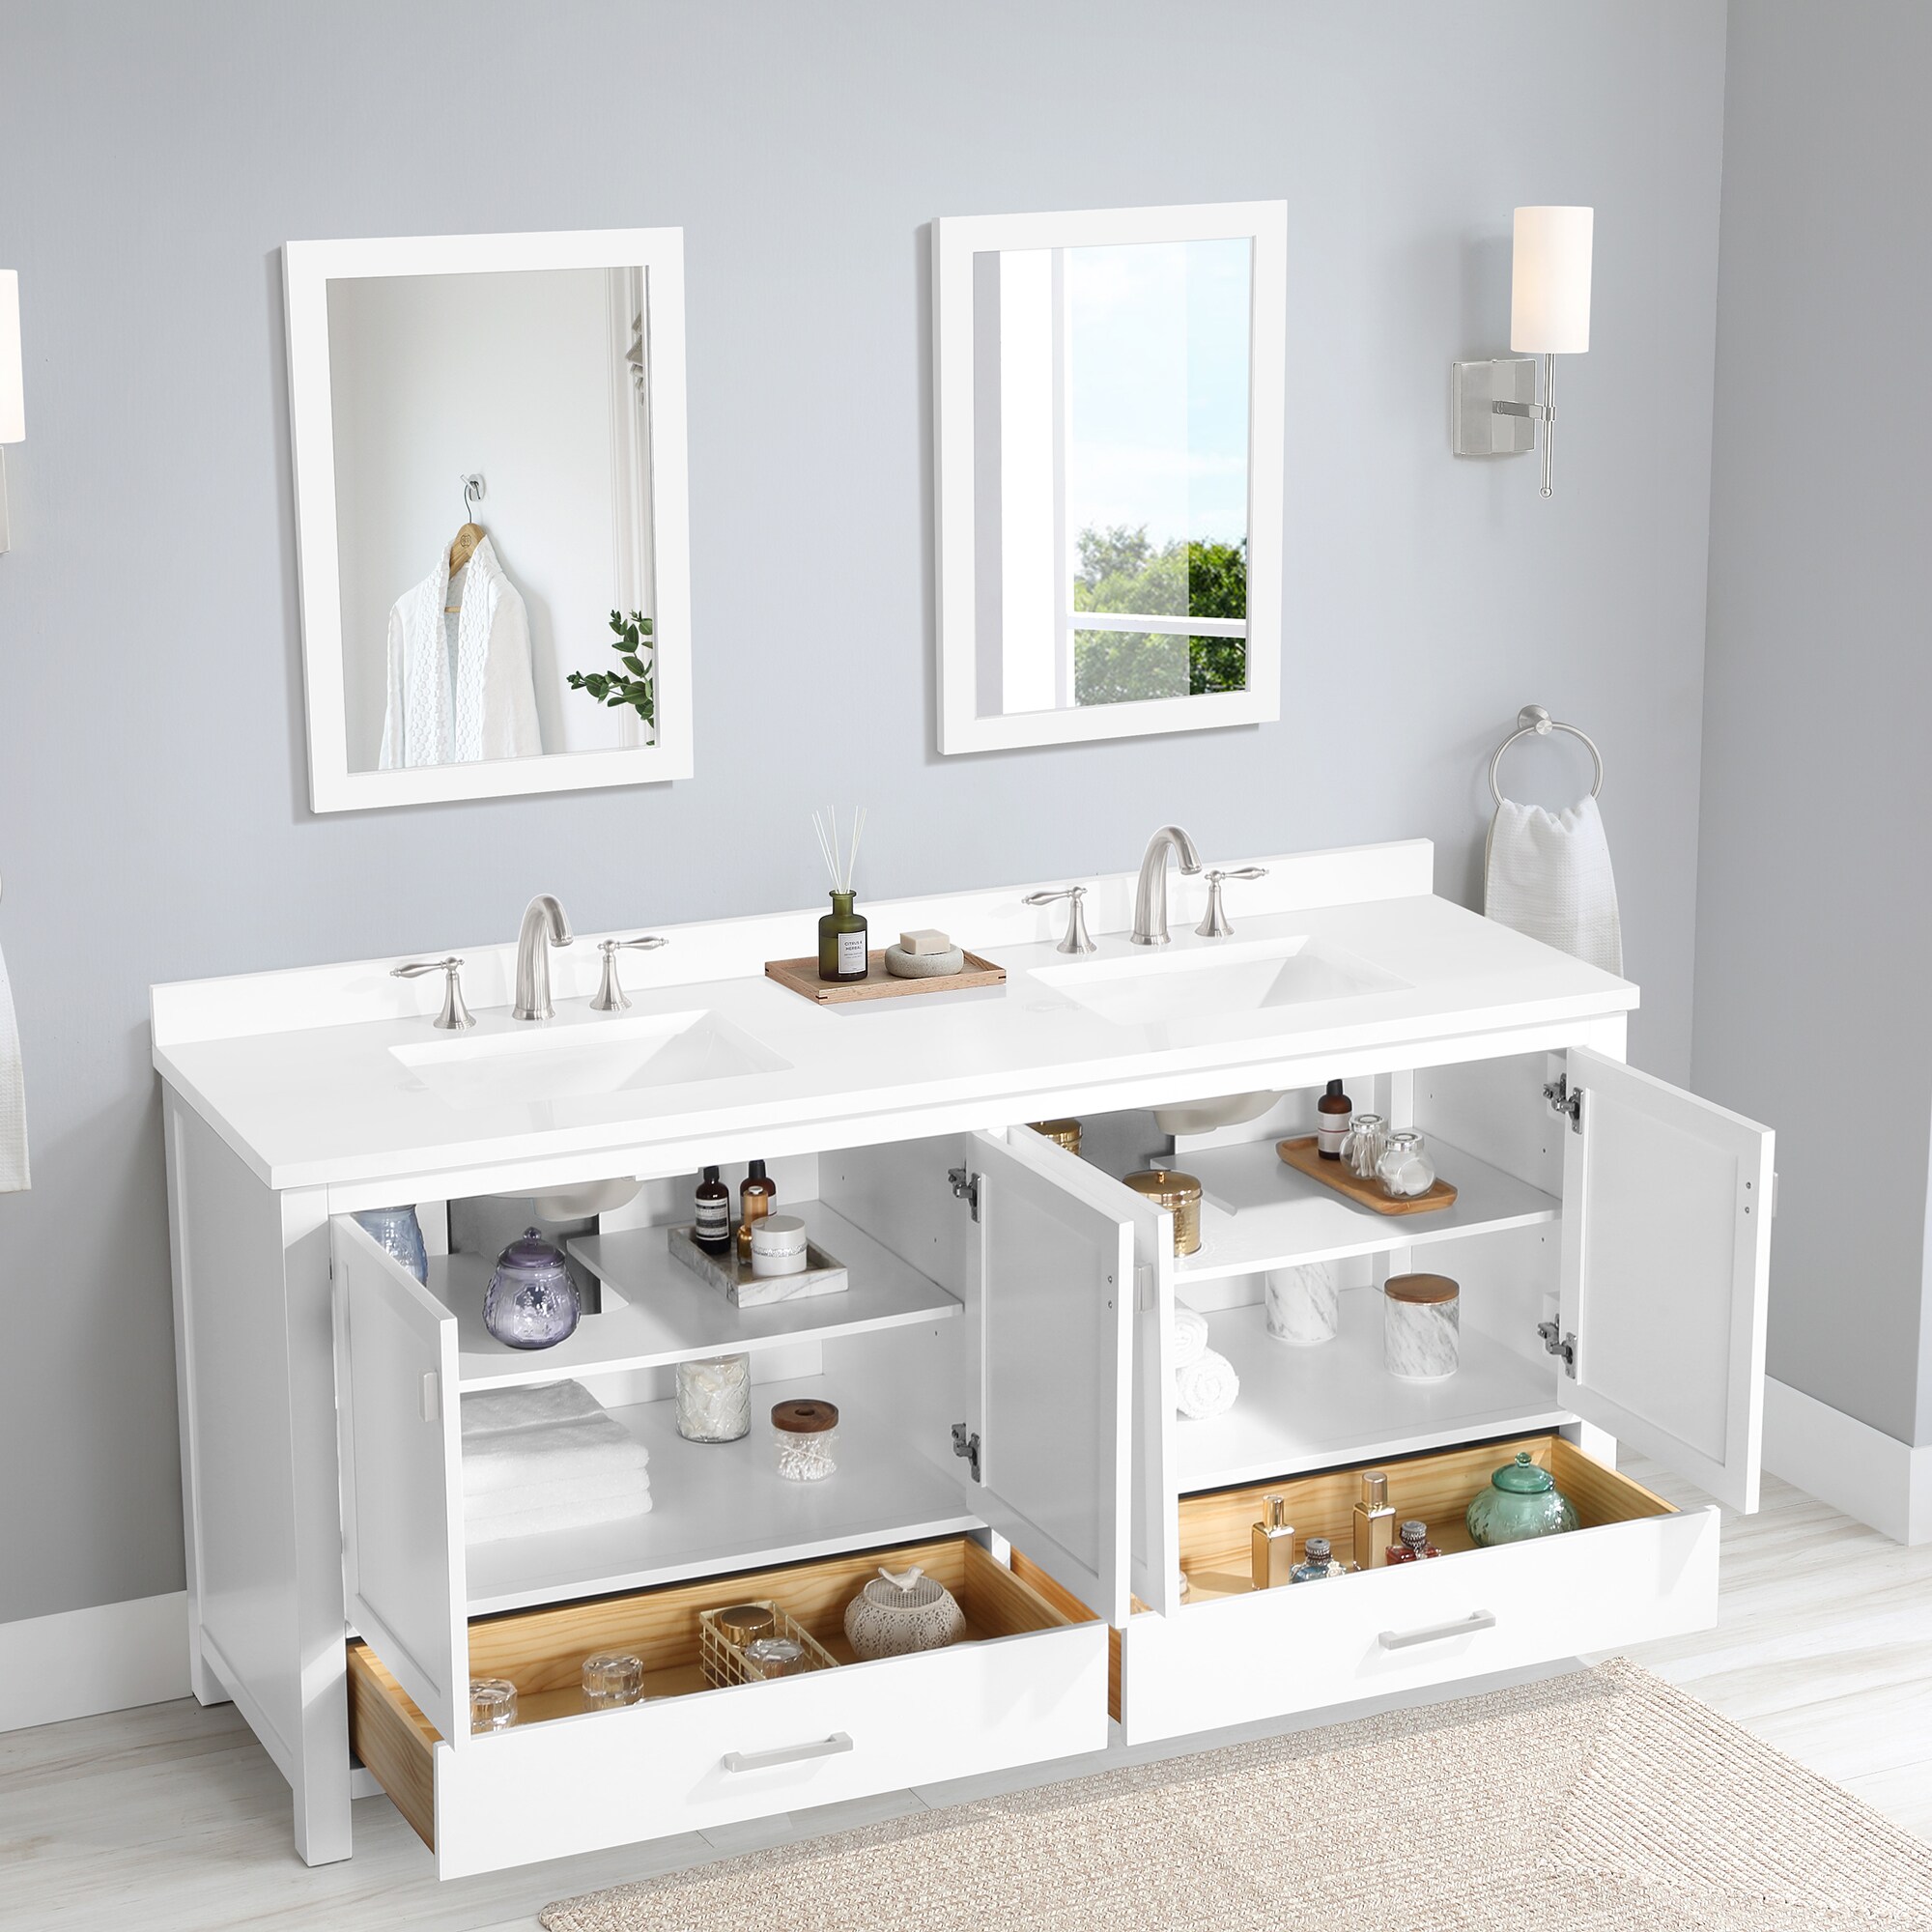 allen + roth Ronald 72-in Almond Toffee Undermount Double Sink Bathroom  Vanity with White Engineered Stone Top in Brown